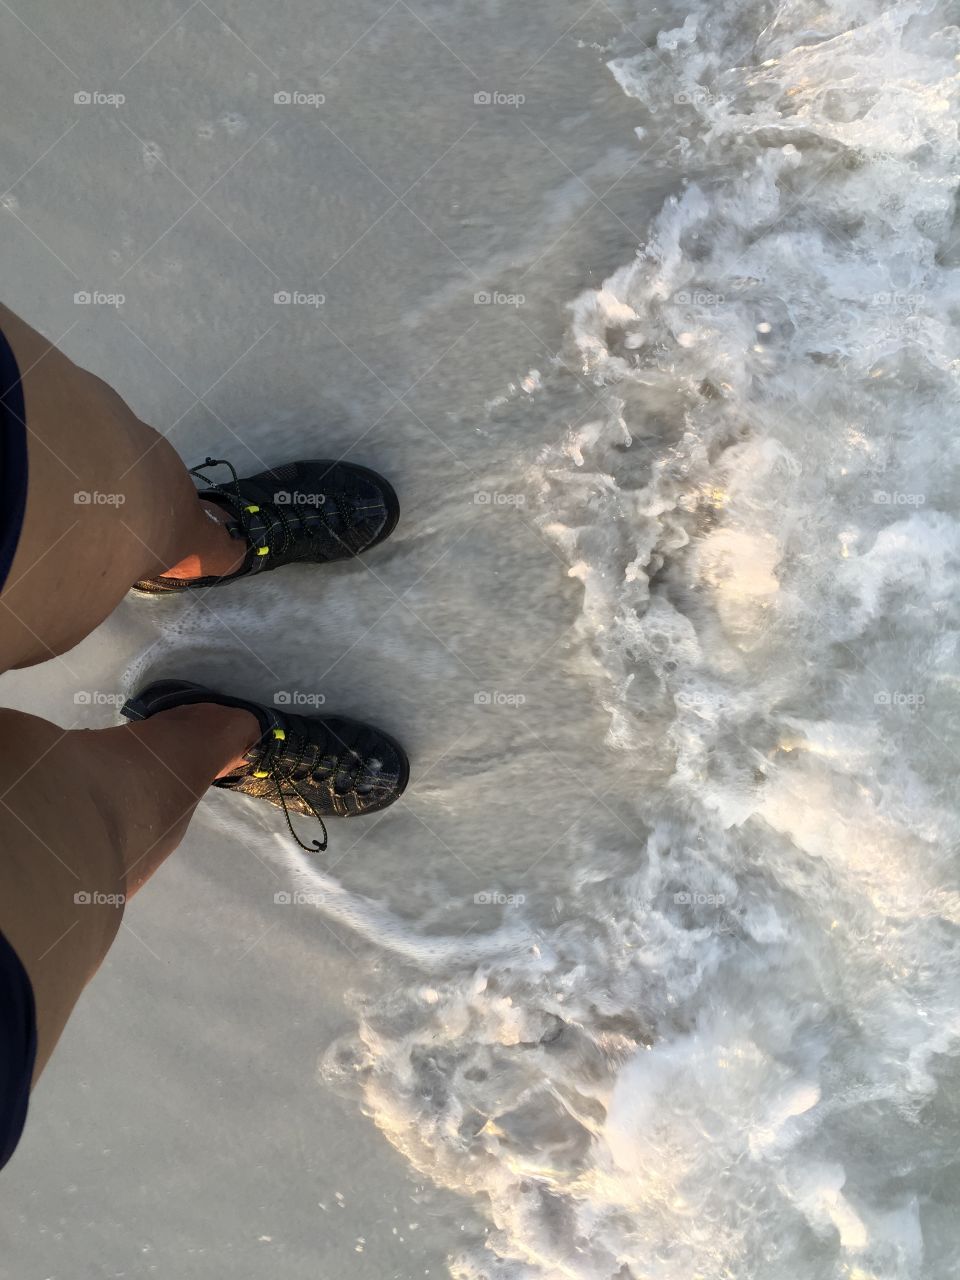 Looking at my feet while the waves come and go.